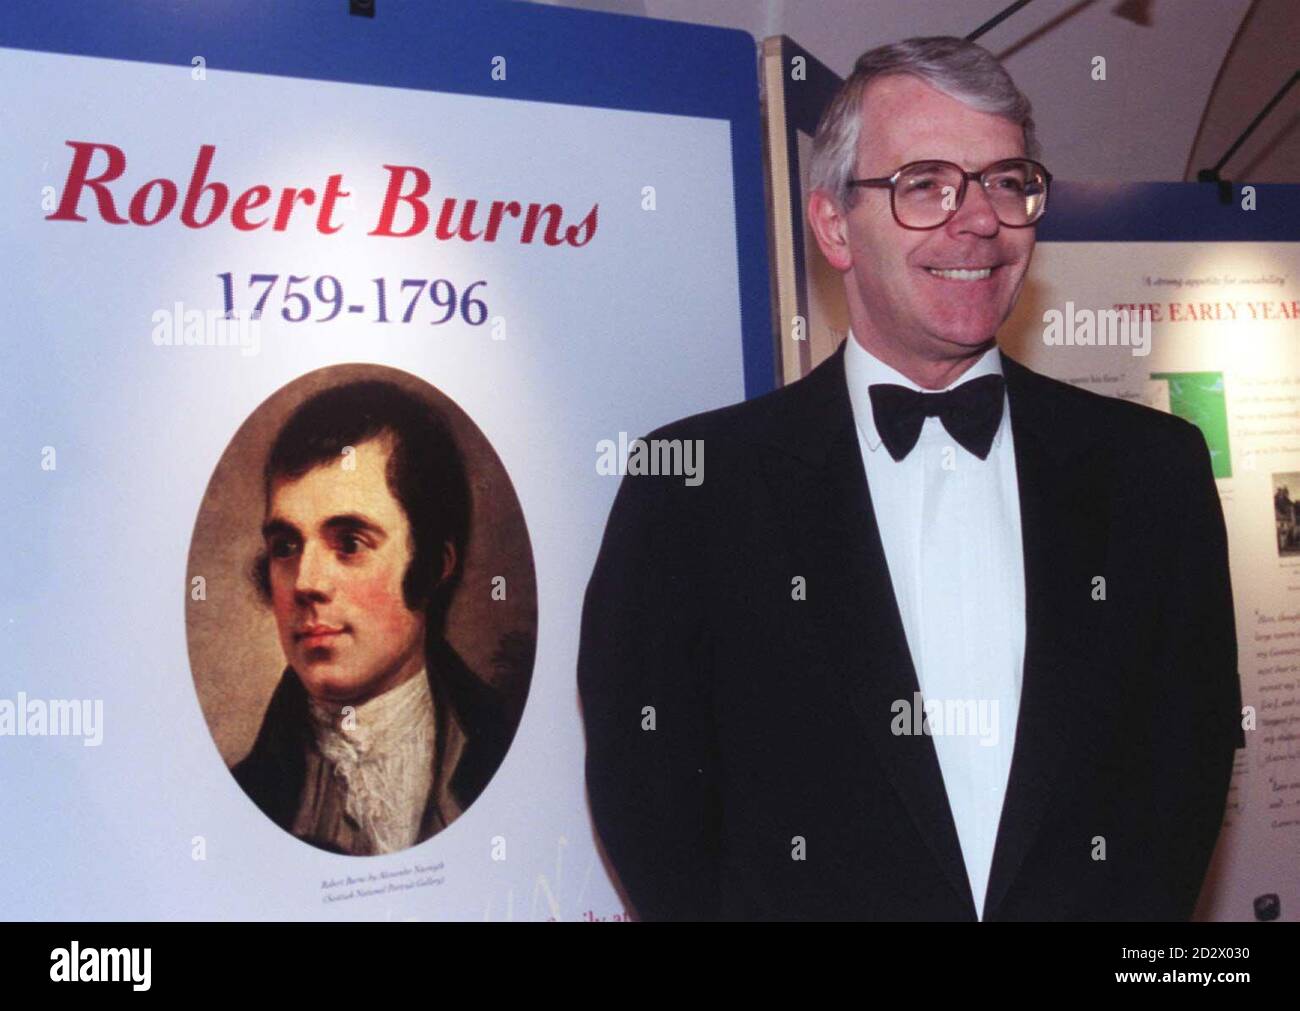 Prime Minister John Major at a dinner at Banqueting House honouring the bicentenary of the death of philosopher and poet Robert Burns. Stock Photo